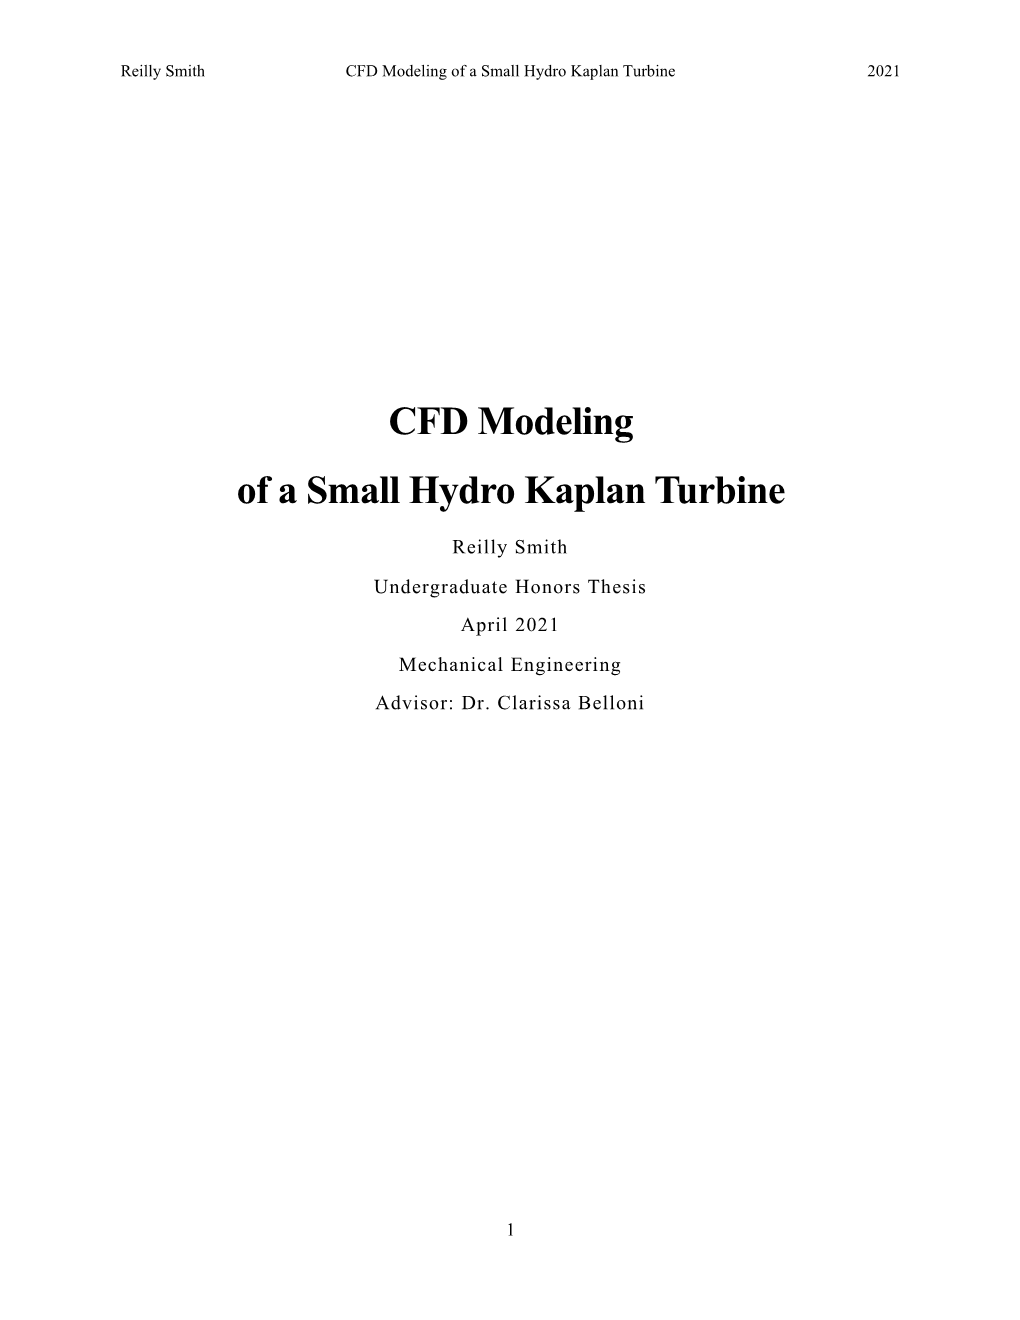 CFD Modeling of a Small Hydro Kaplan Turbine 2021